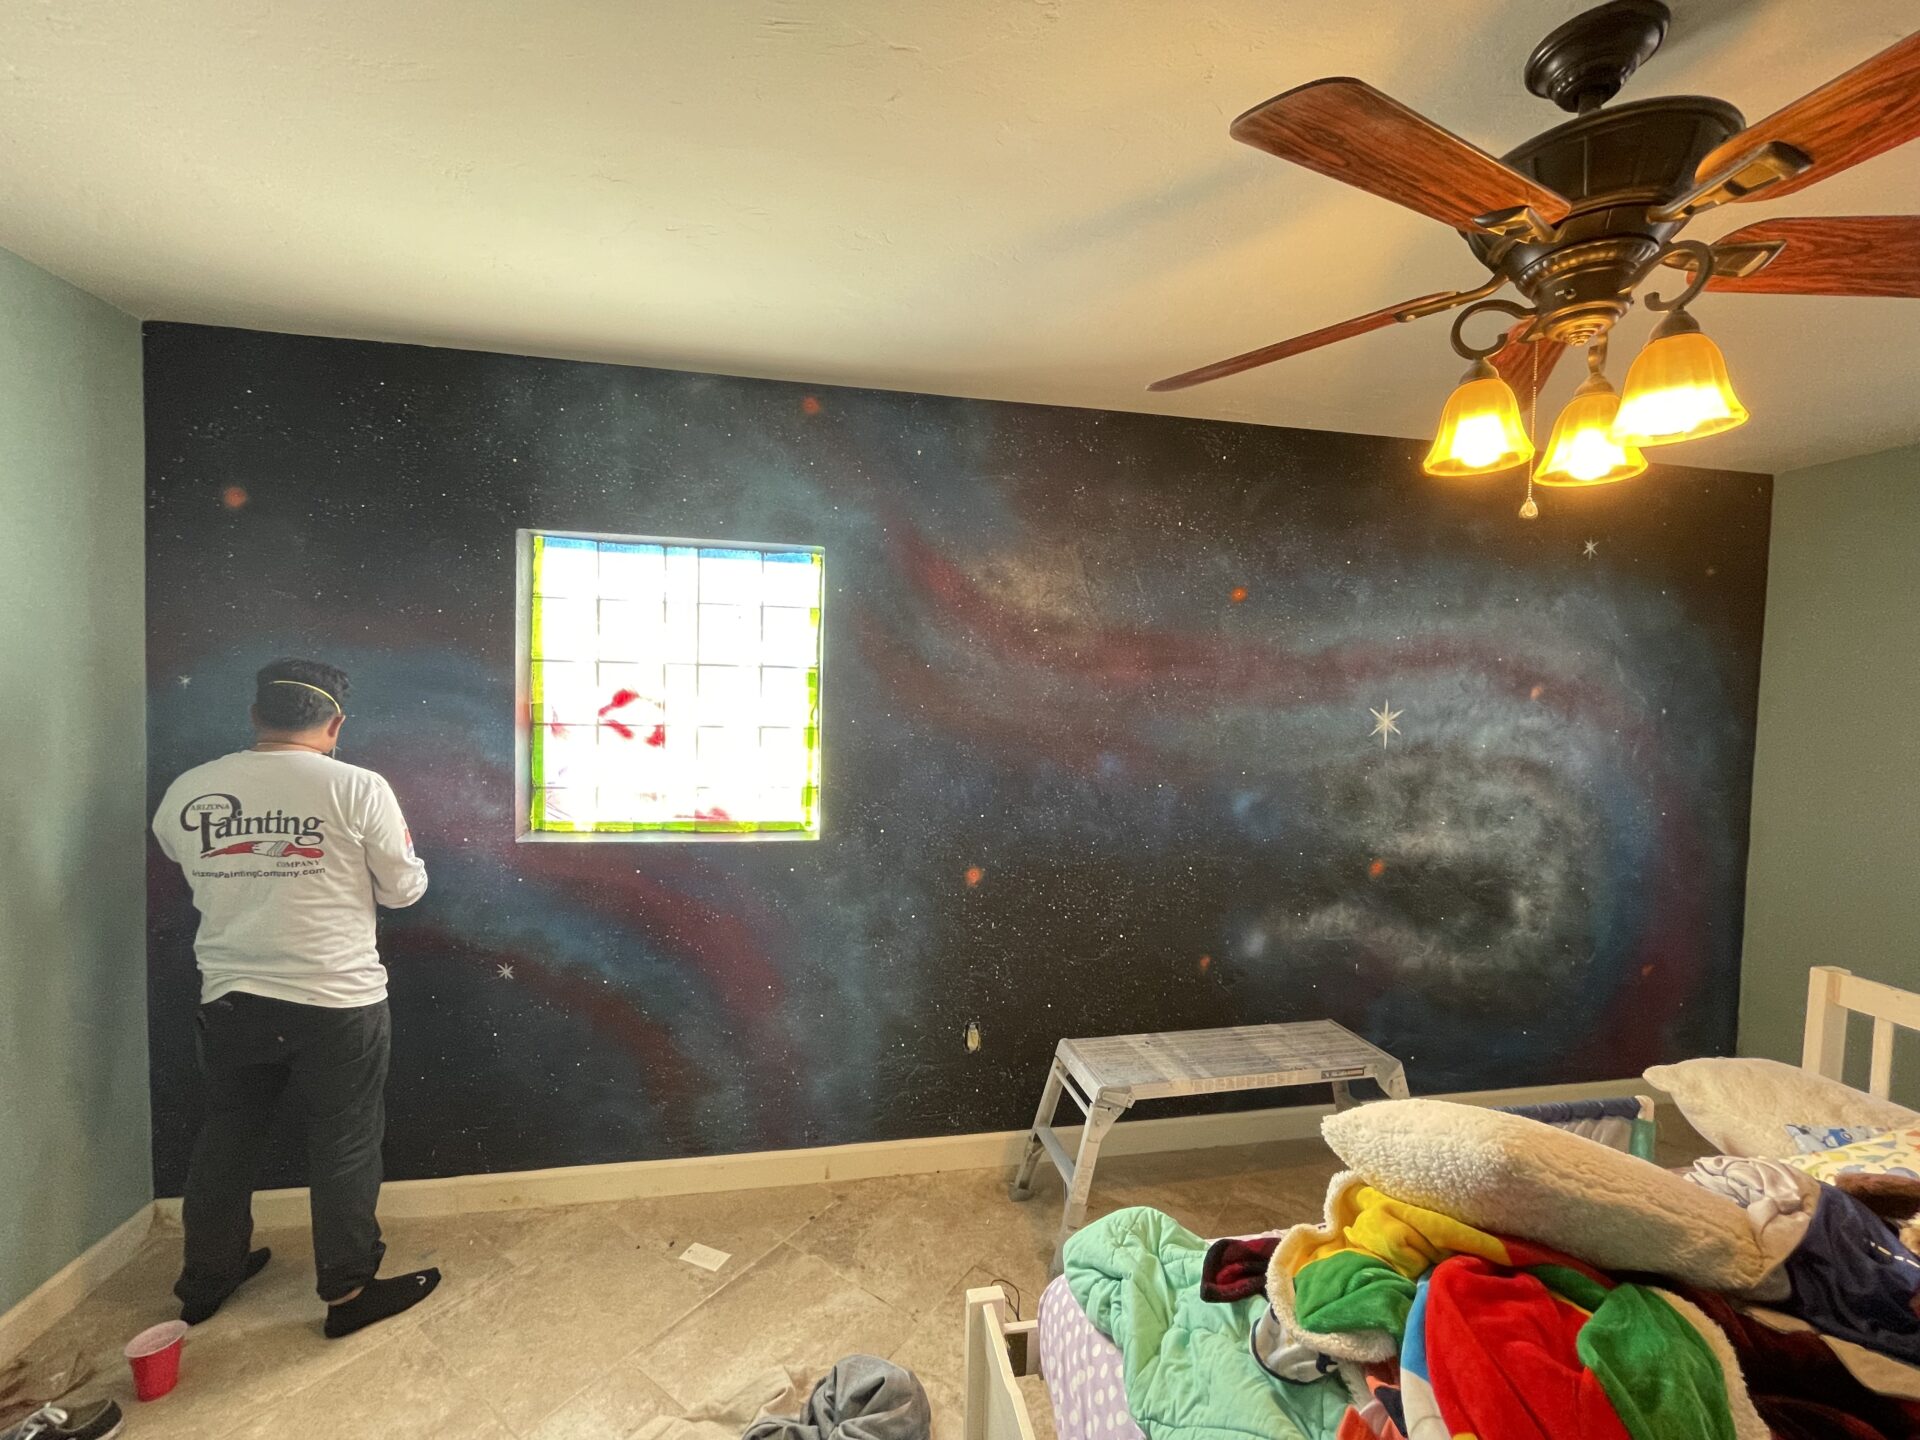 Galaxy-themed bedroom paint project